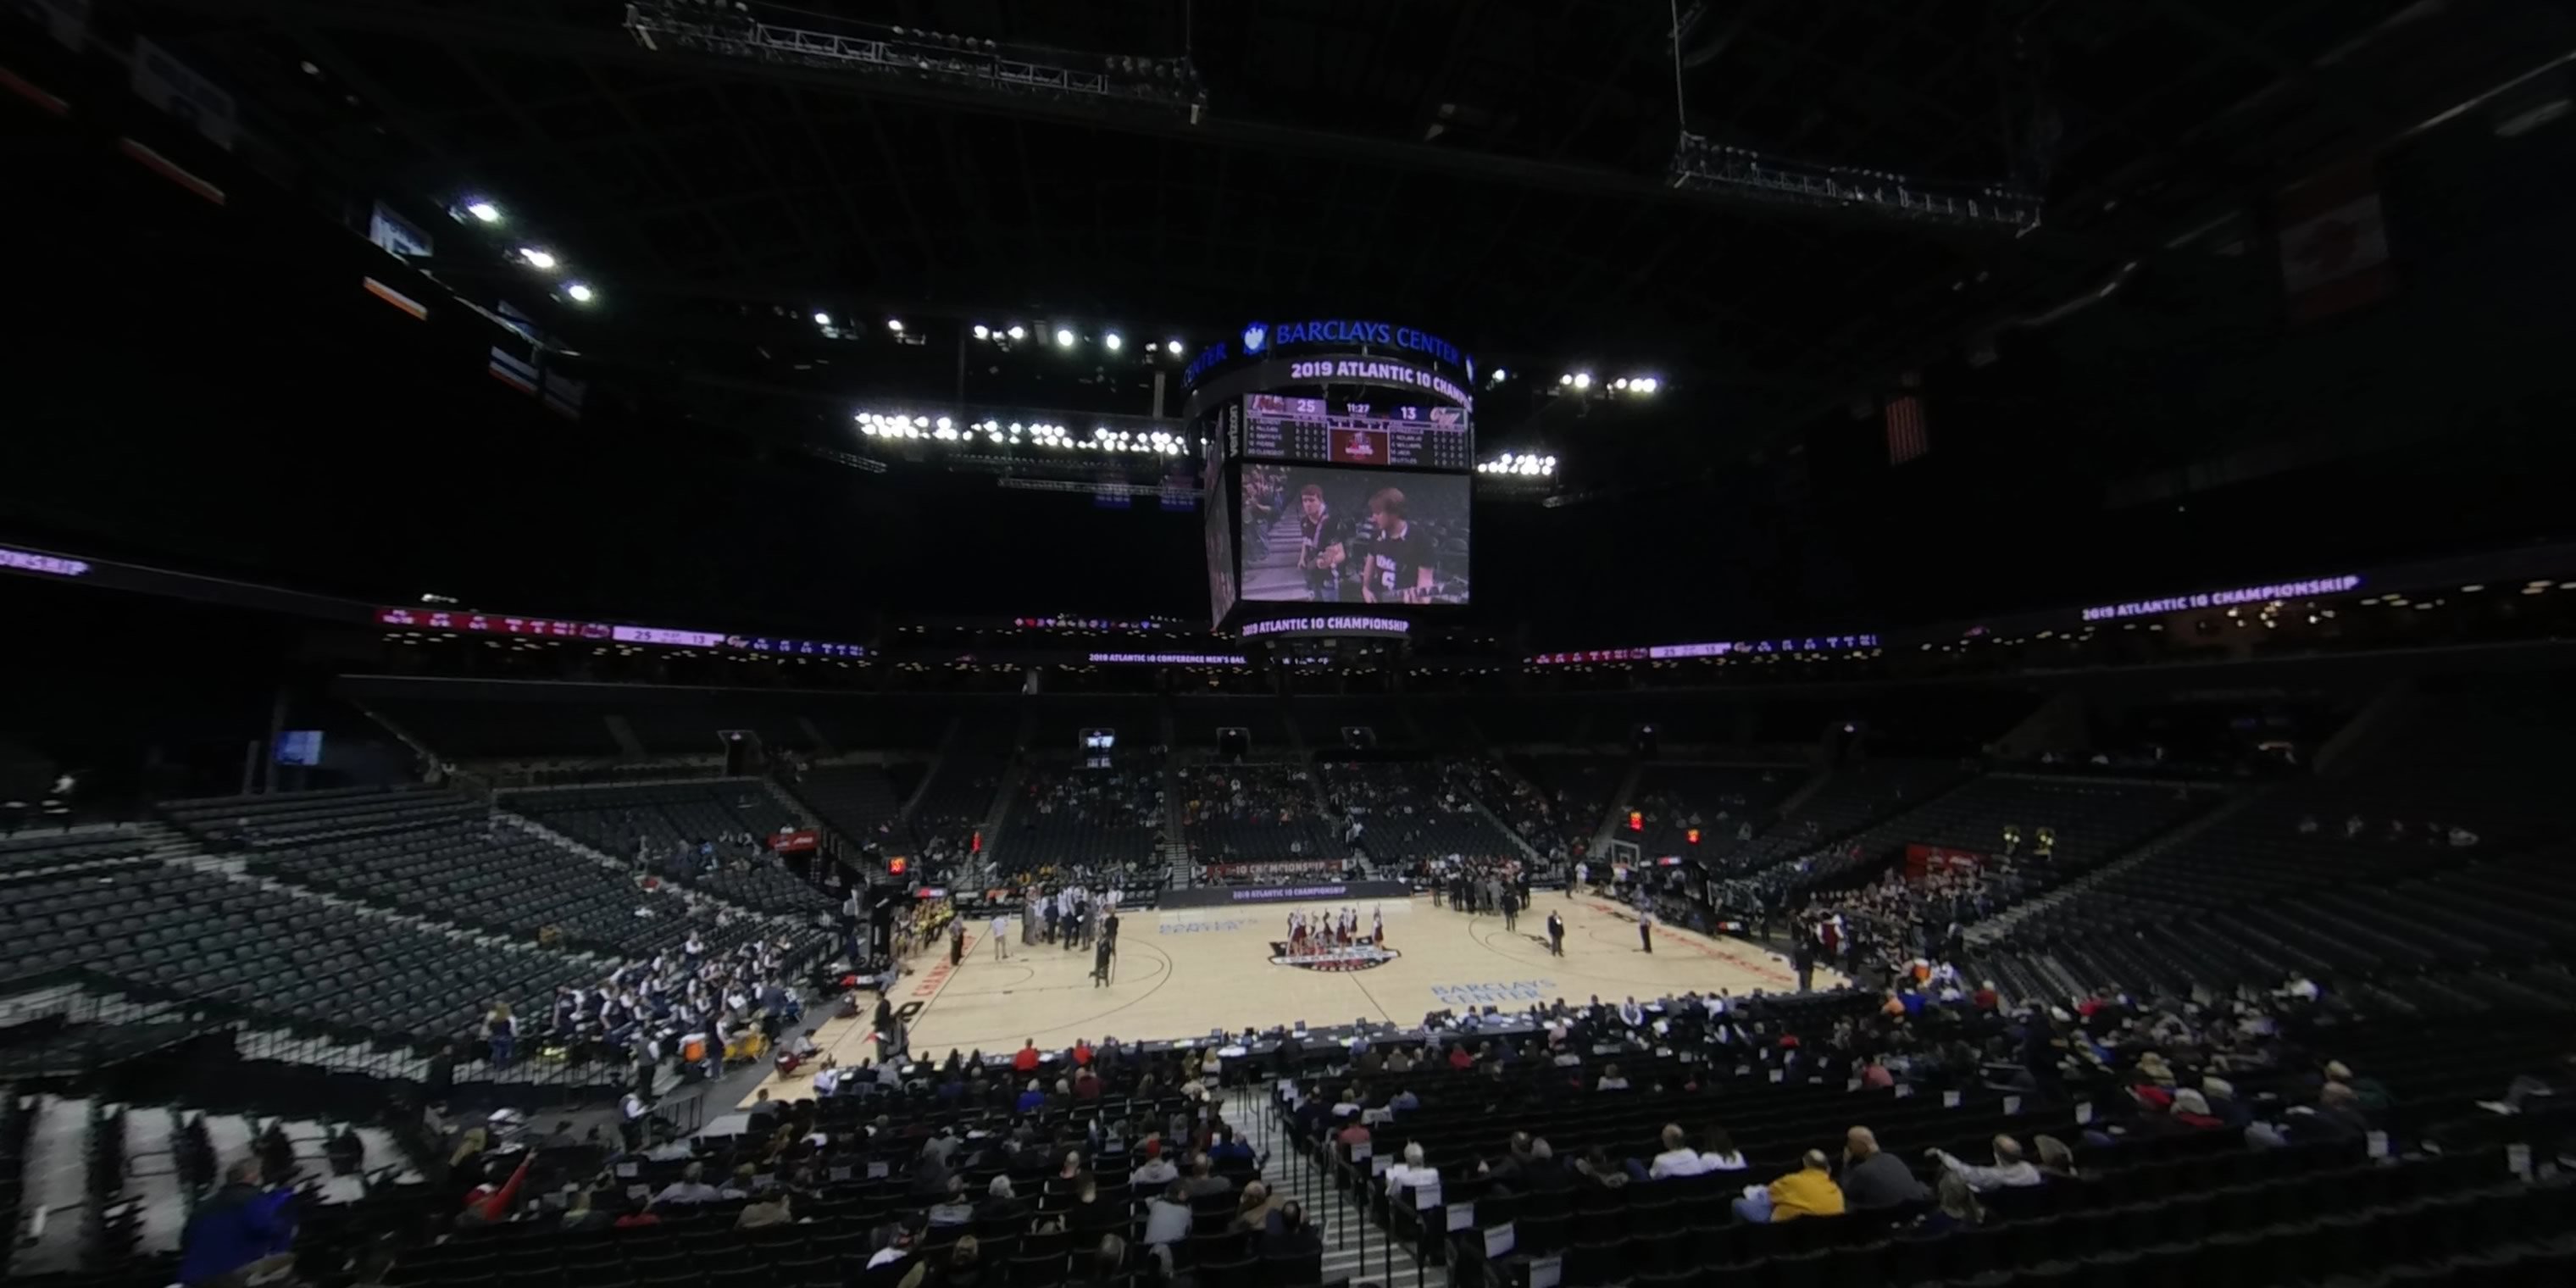 section 125 panoramic seat view  for basketball - barclays center